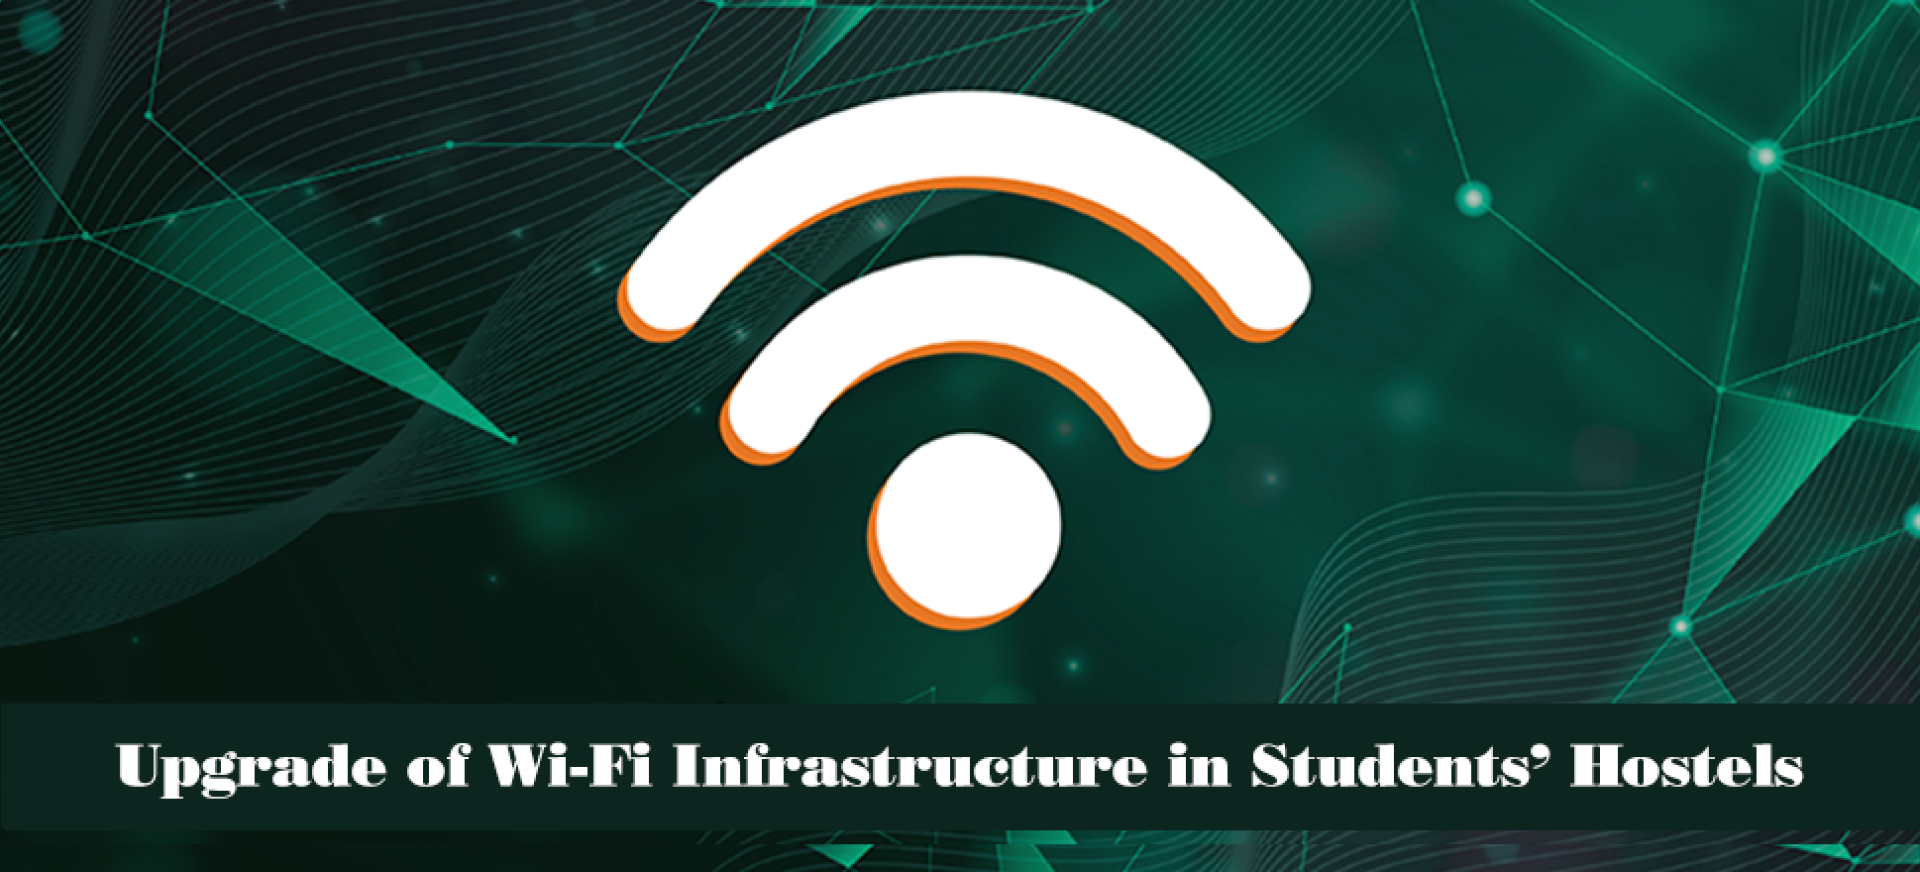 Issue 13 - Upgrade of Wi-Fi Infrastructure in Students’ Hostels